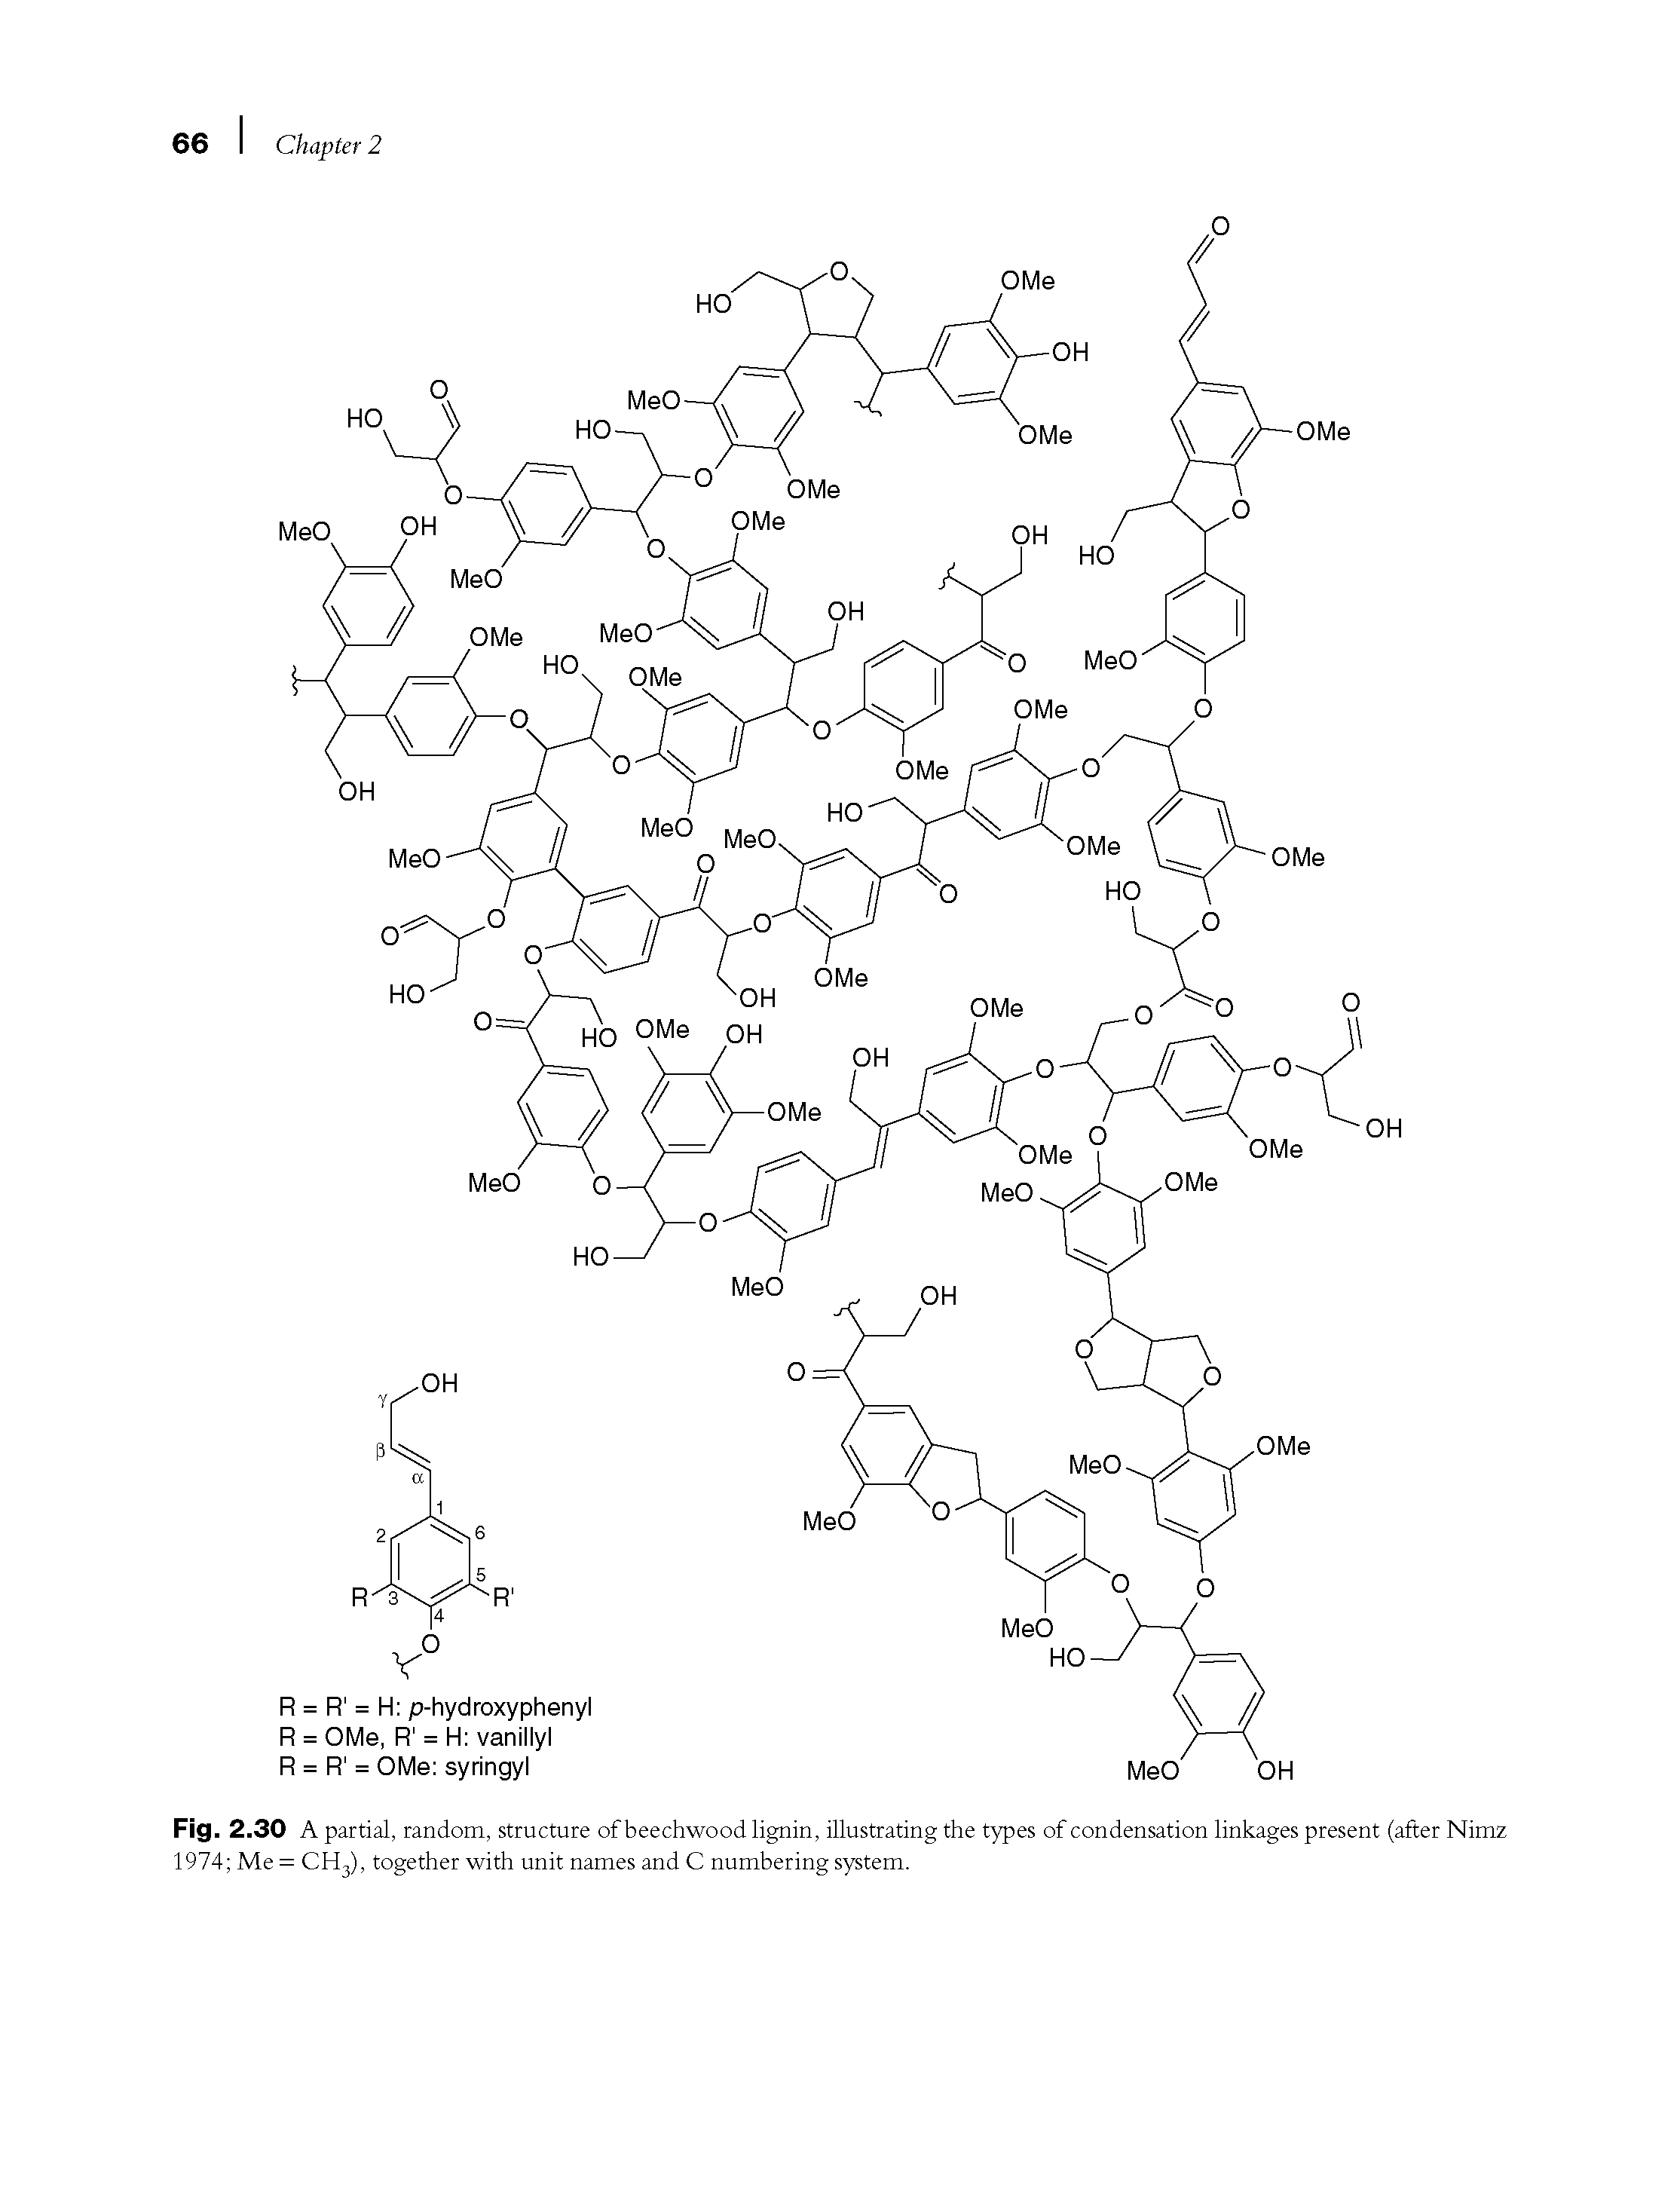 Fig. 2.30 A partial, random, structure of beechwood lignin, illustrating the types of condensation linkages present (after Nimz 1974 Me = CH3), together with unit names and C numbering system.